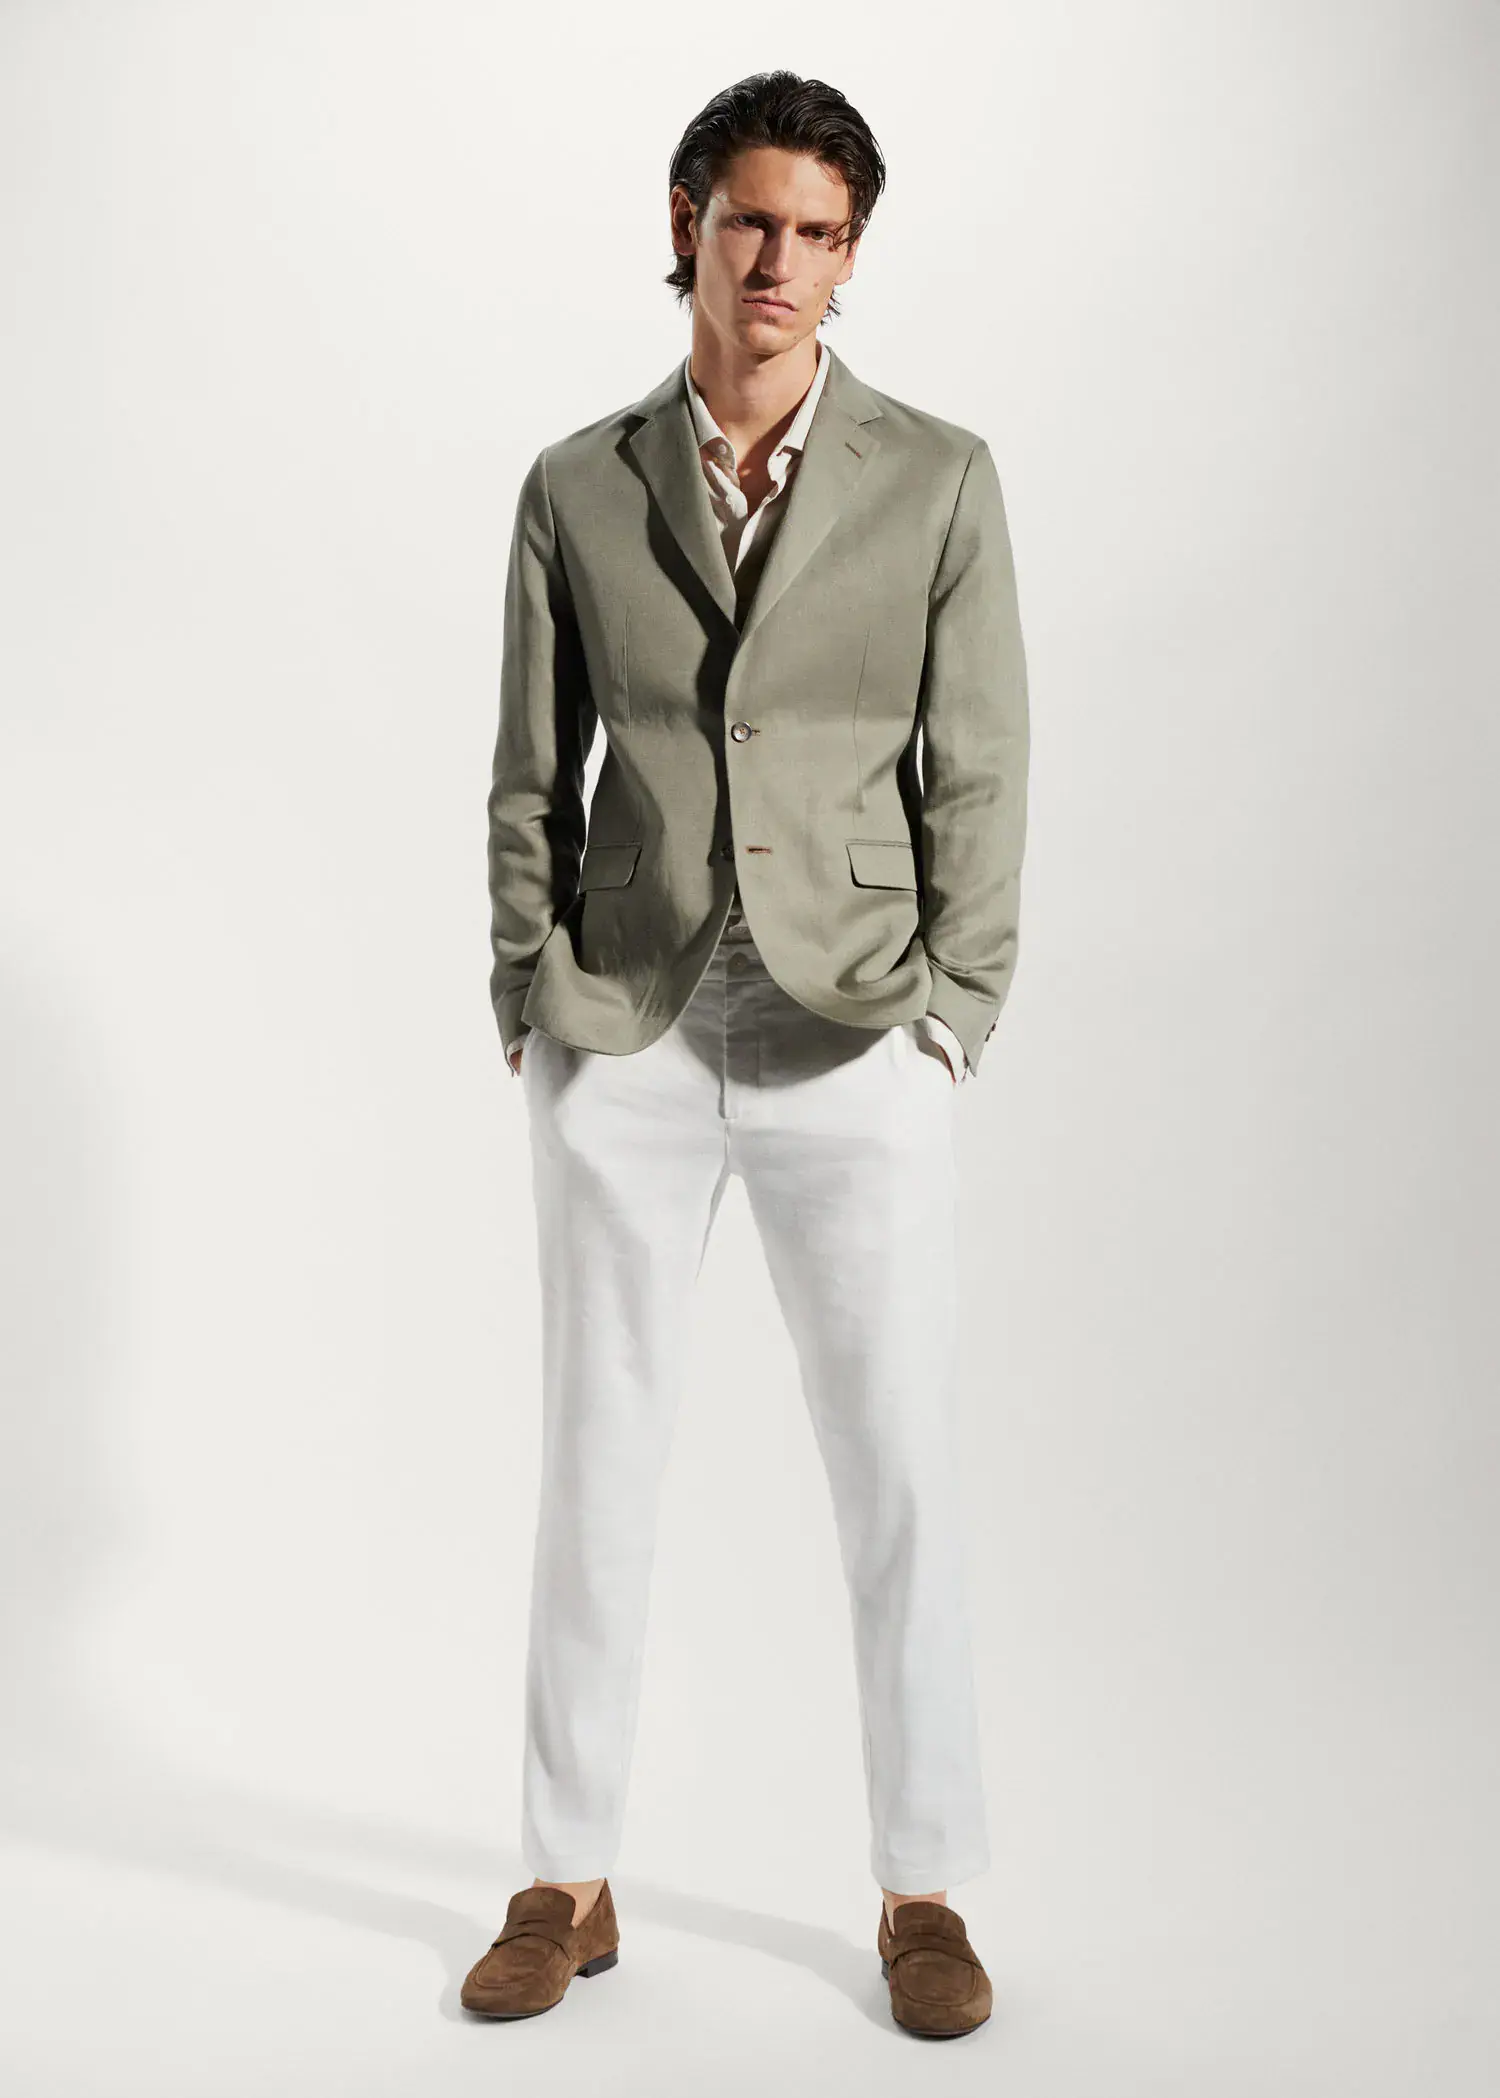 Mango Slim fit linen suit blazer. a man in a suit and tie standing with his hands in his pockets. 